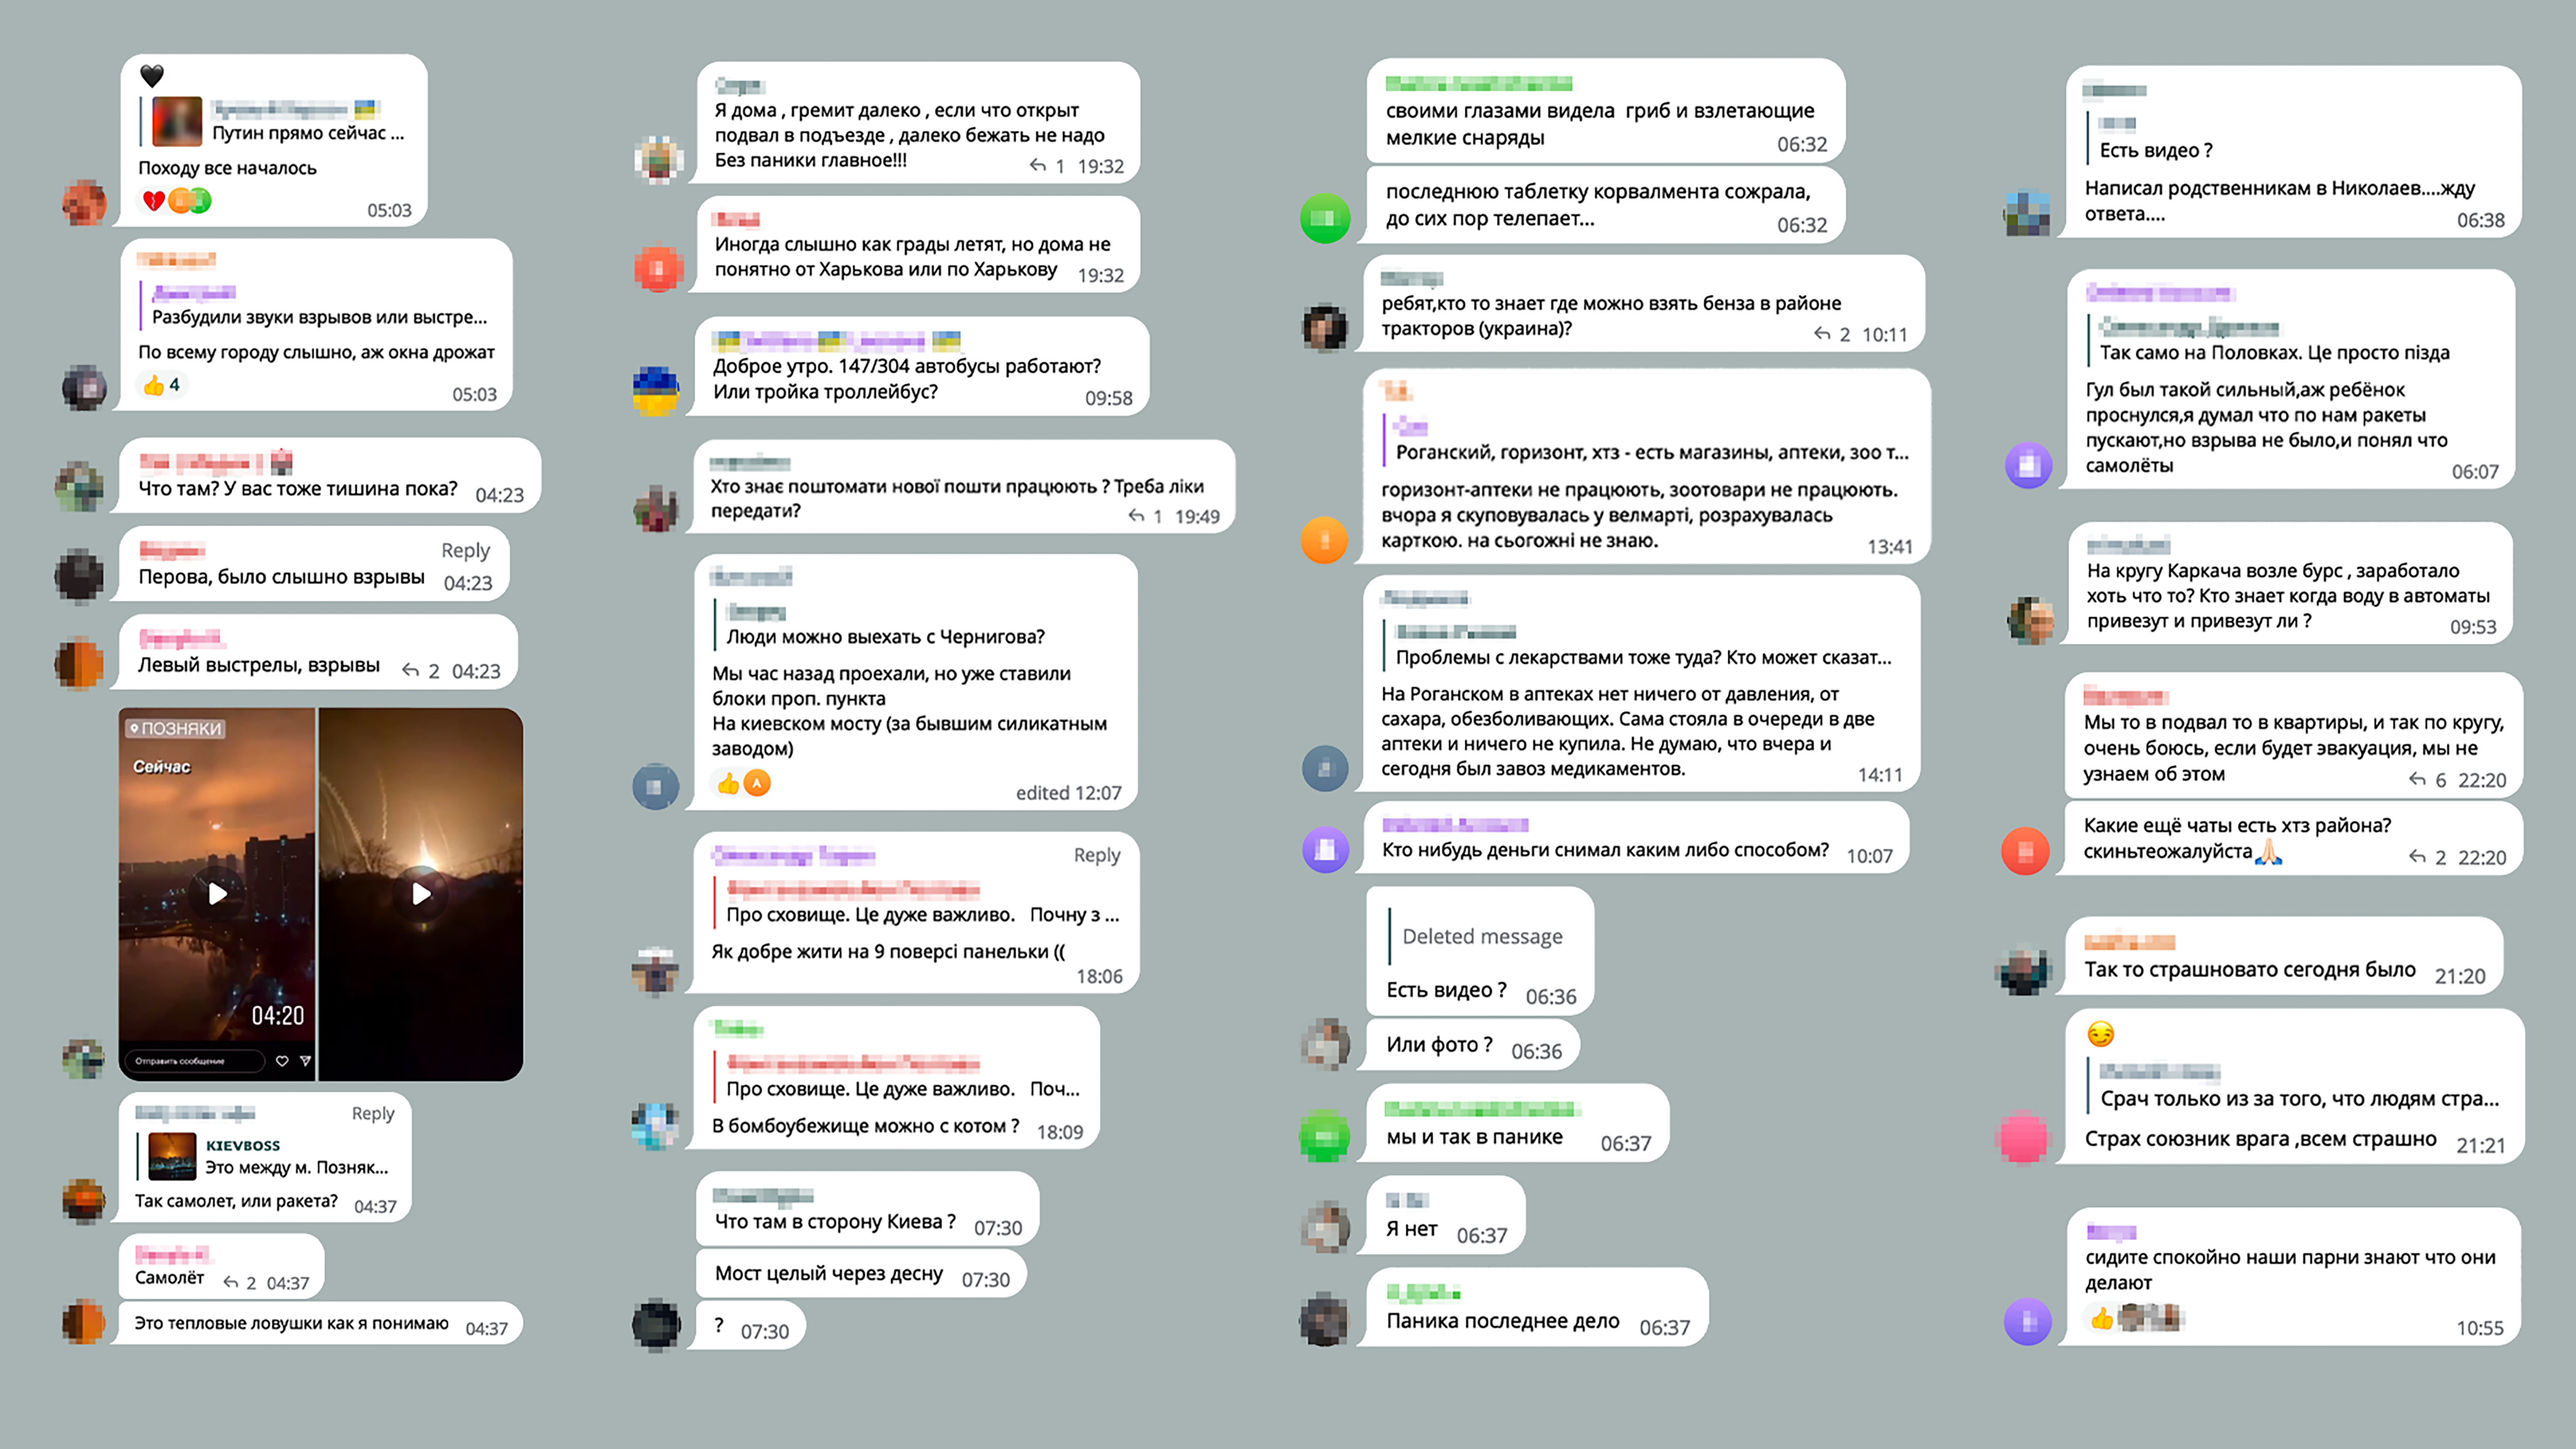 Panic of the first days of the war: Users discuss the situation in their locality or district, exchange info on the working hours of groceries, pharmacies, etc.
Dokumentarische Praktiken in Telegram-Chats
(© Center for Urban History of East Central Europe)